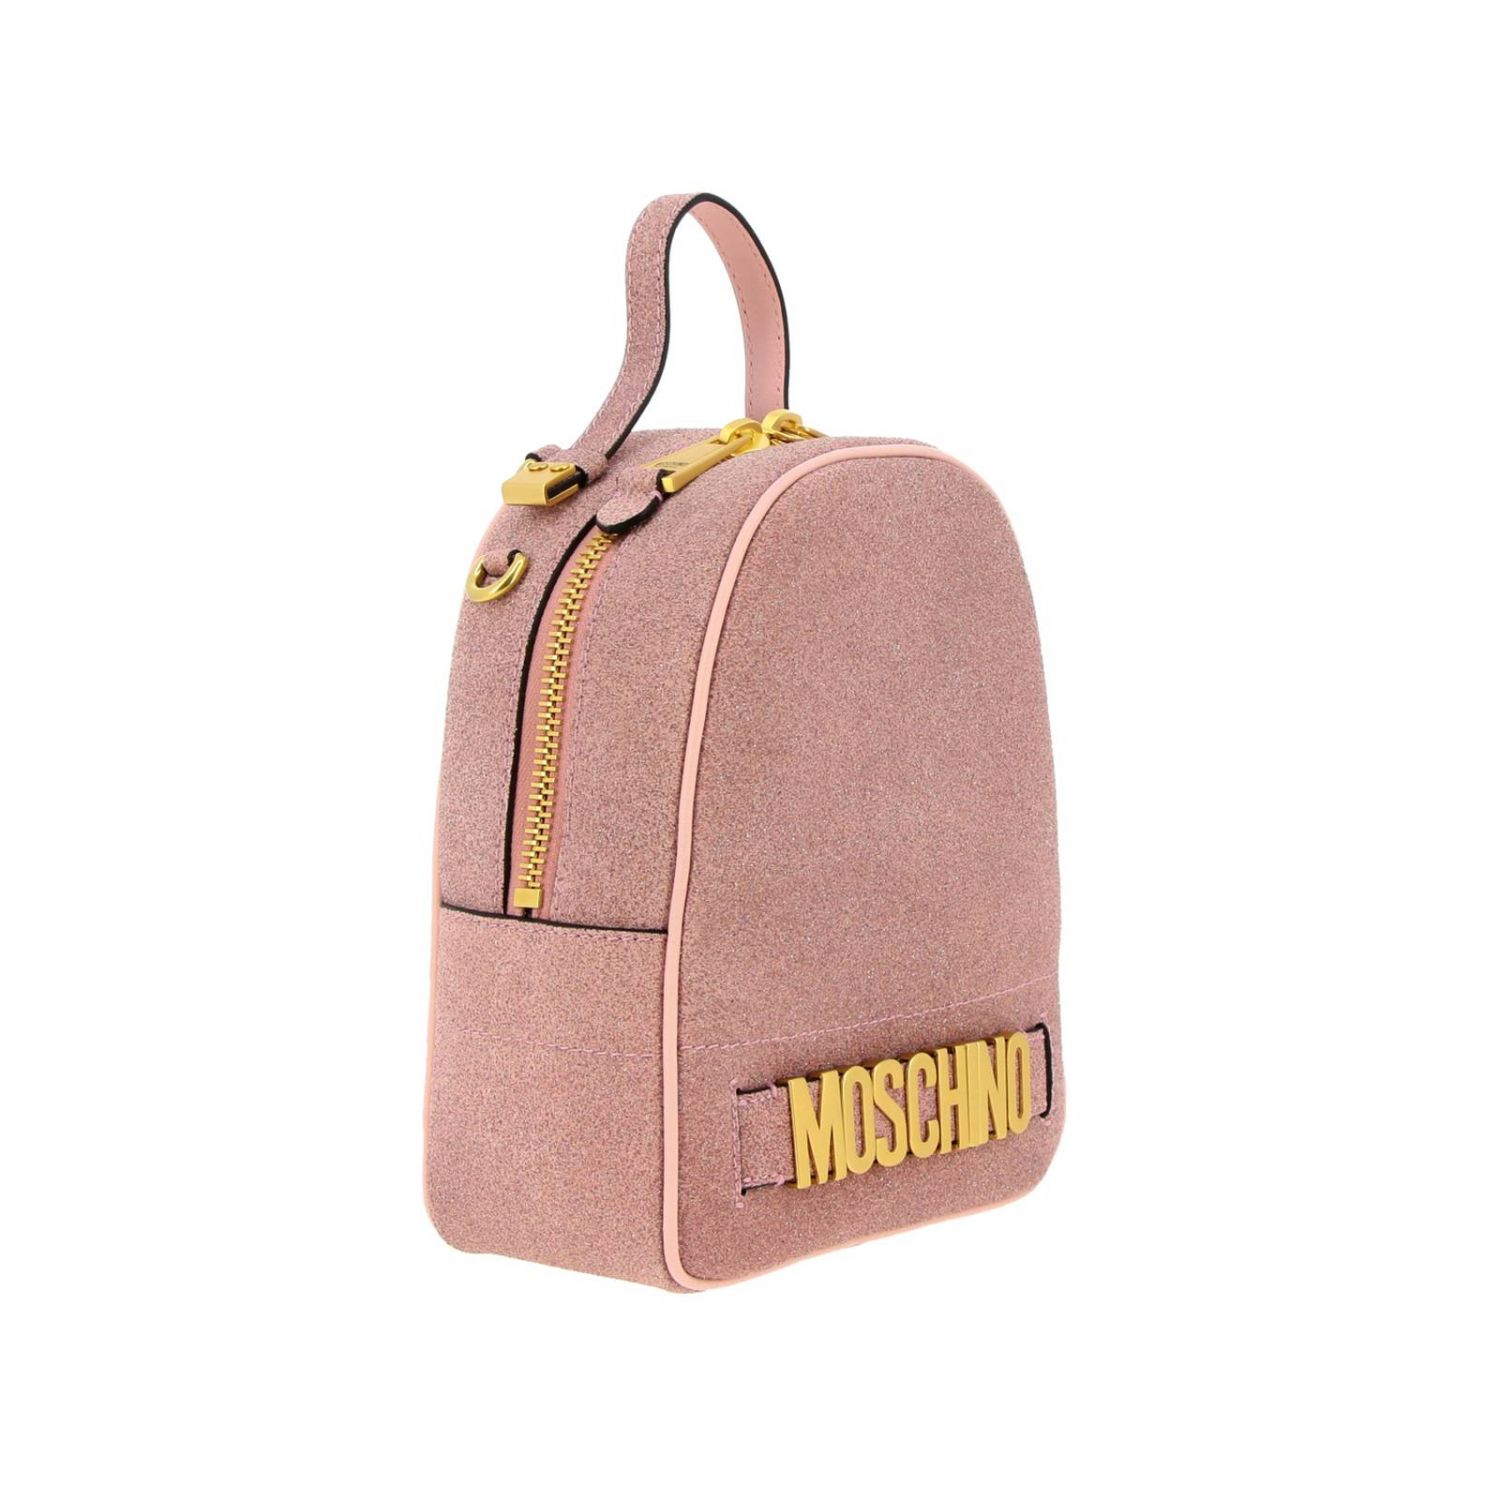 Moschino Outlet: Backpack women | Backpack Moschino Women Pink ...